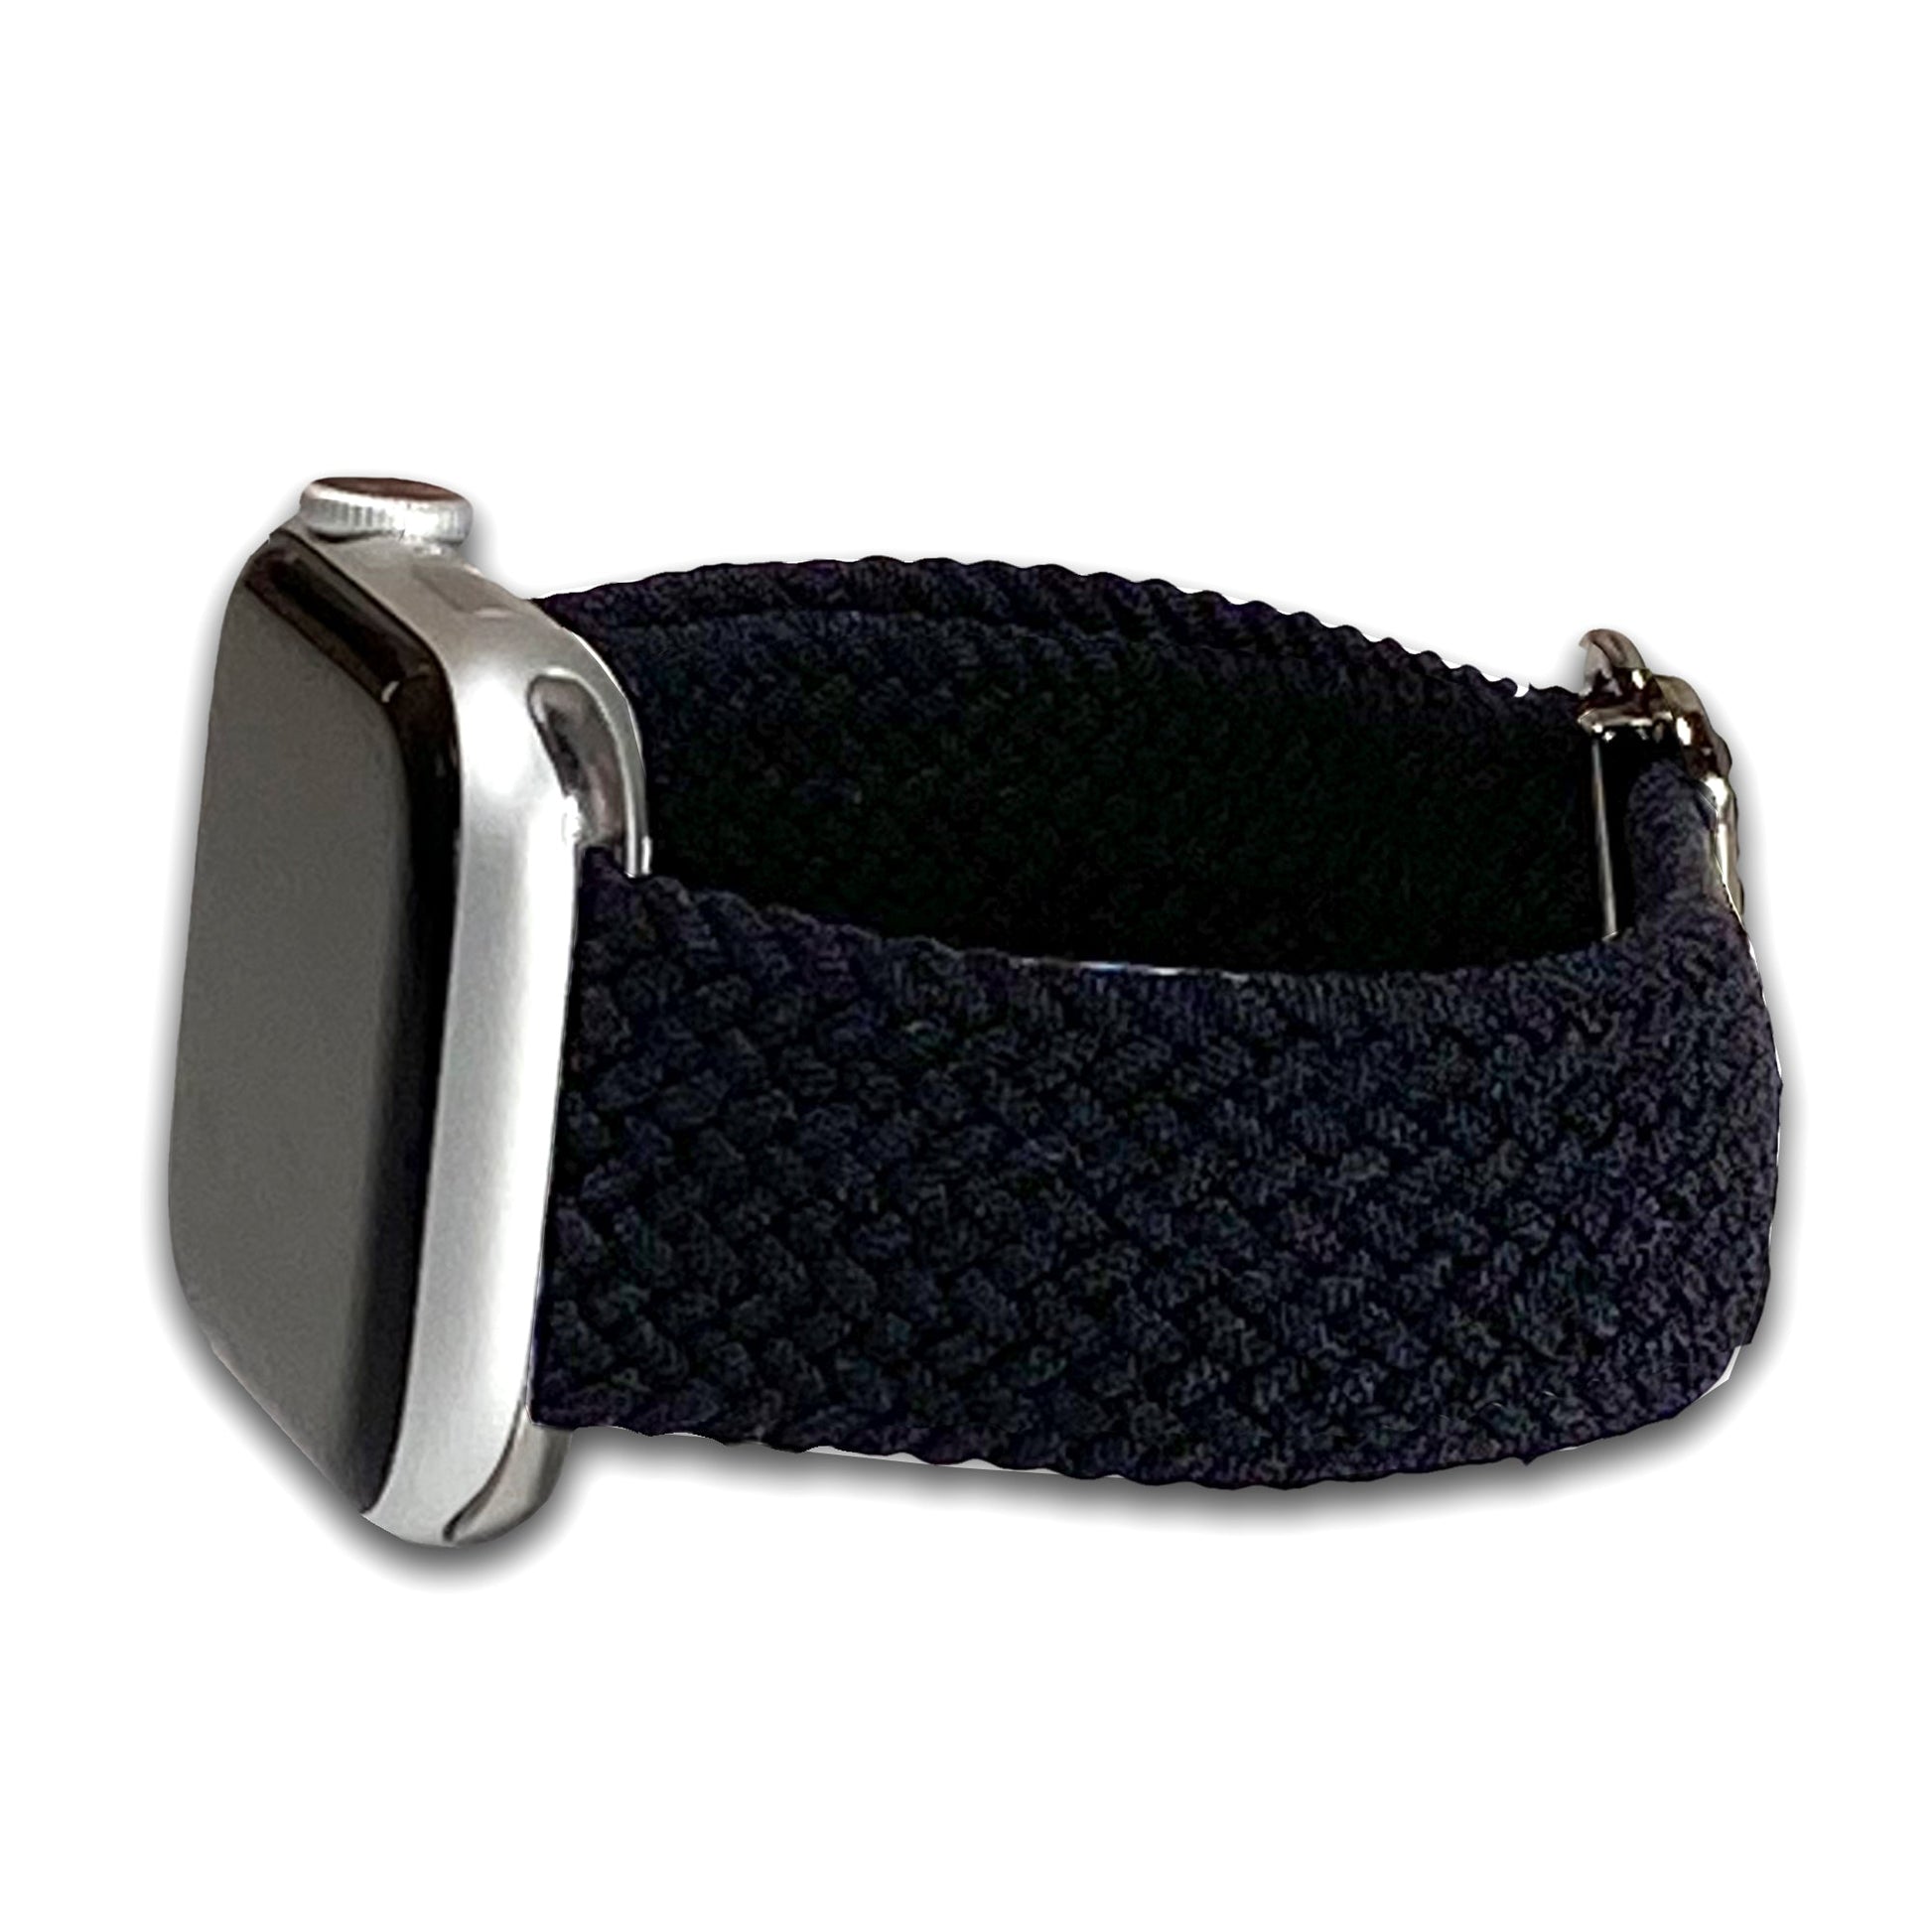 Black Braided Weave Nylon Watch Band Compatible with Apple Watch